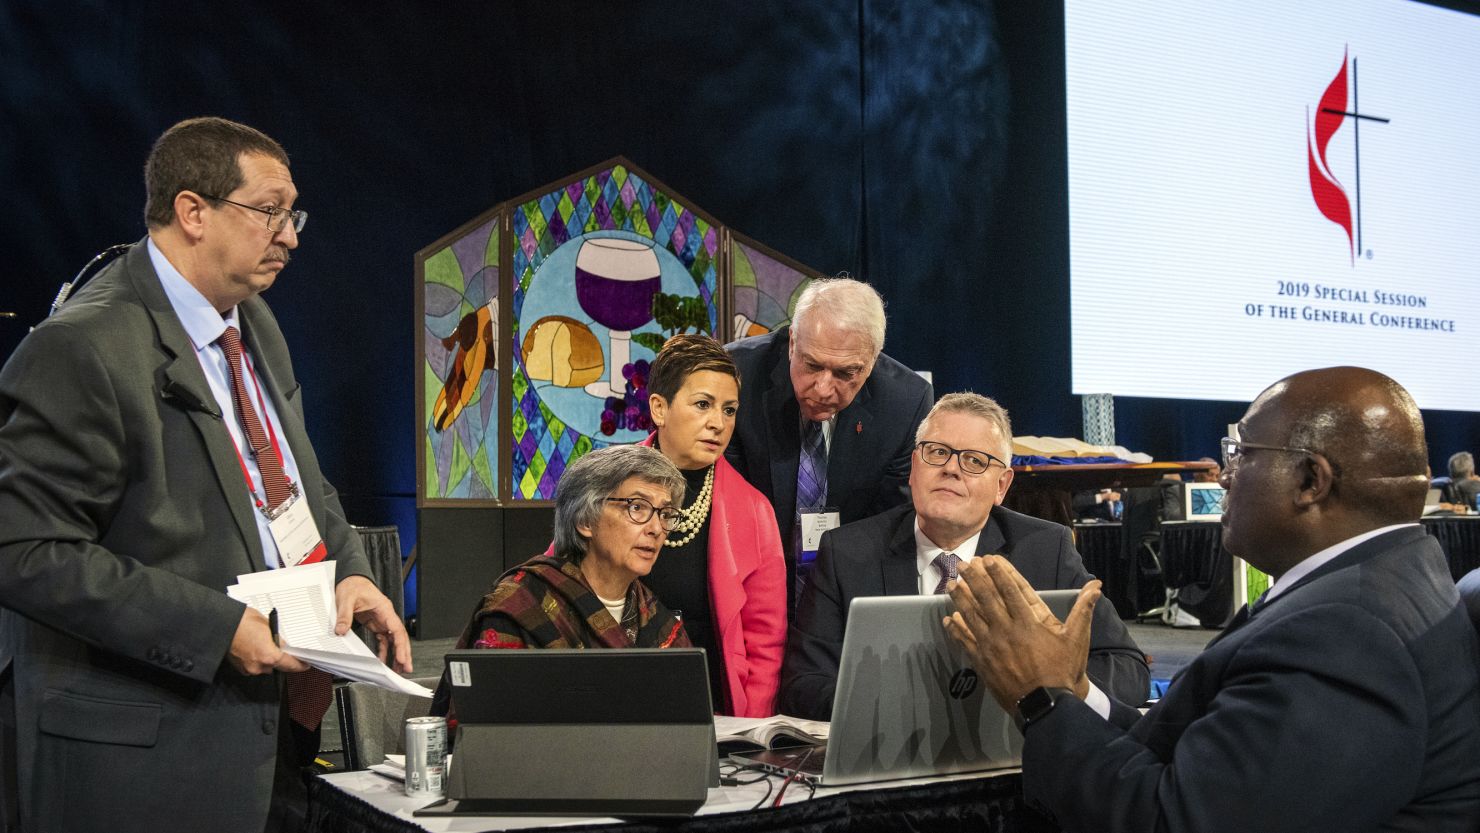 Leaders from the United Methodist Church confer during the 2019 Special Session of the General Conference of The United Methodist Church in St. Louis, Missouri, on February 26 2019.